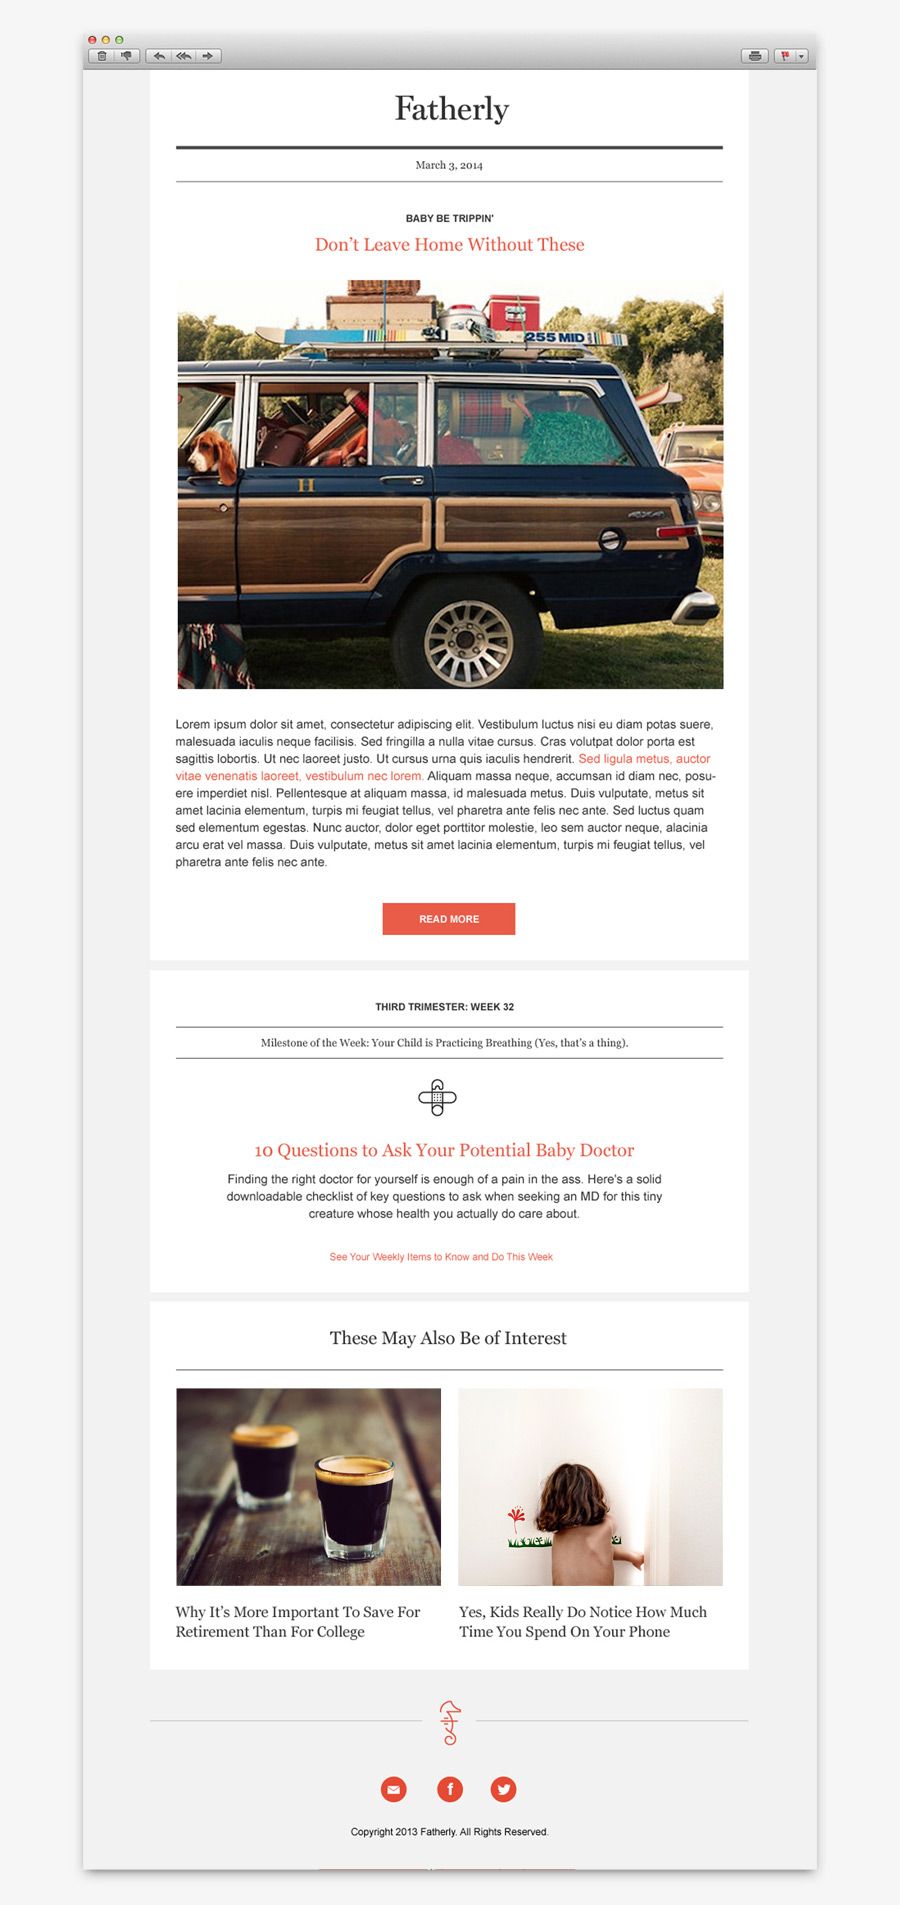 Visual identity and website designed by Apartment One for dad-centric parenting media platform Fatherly